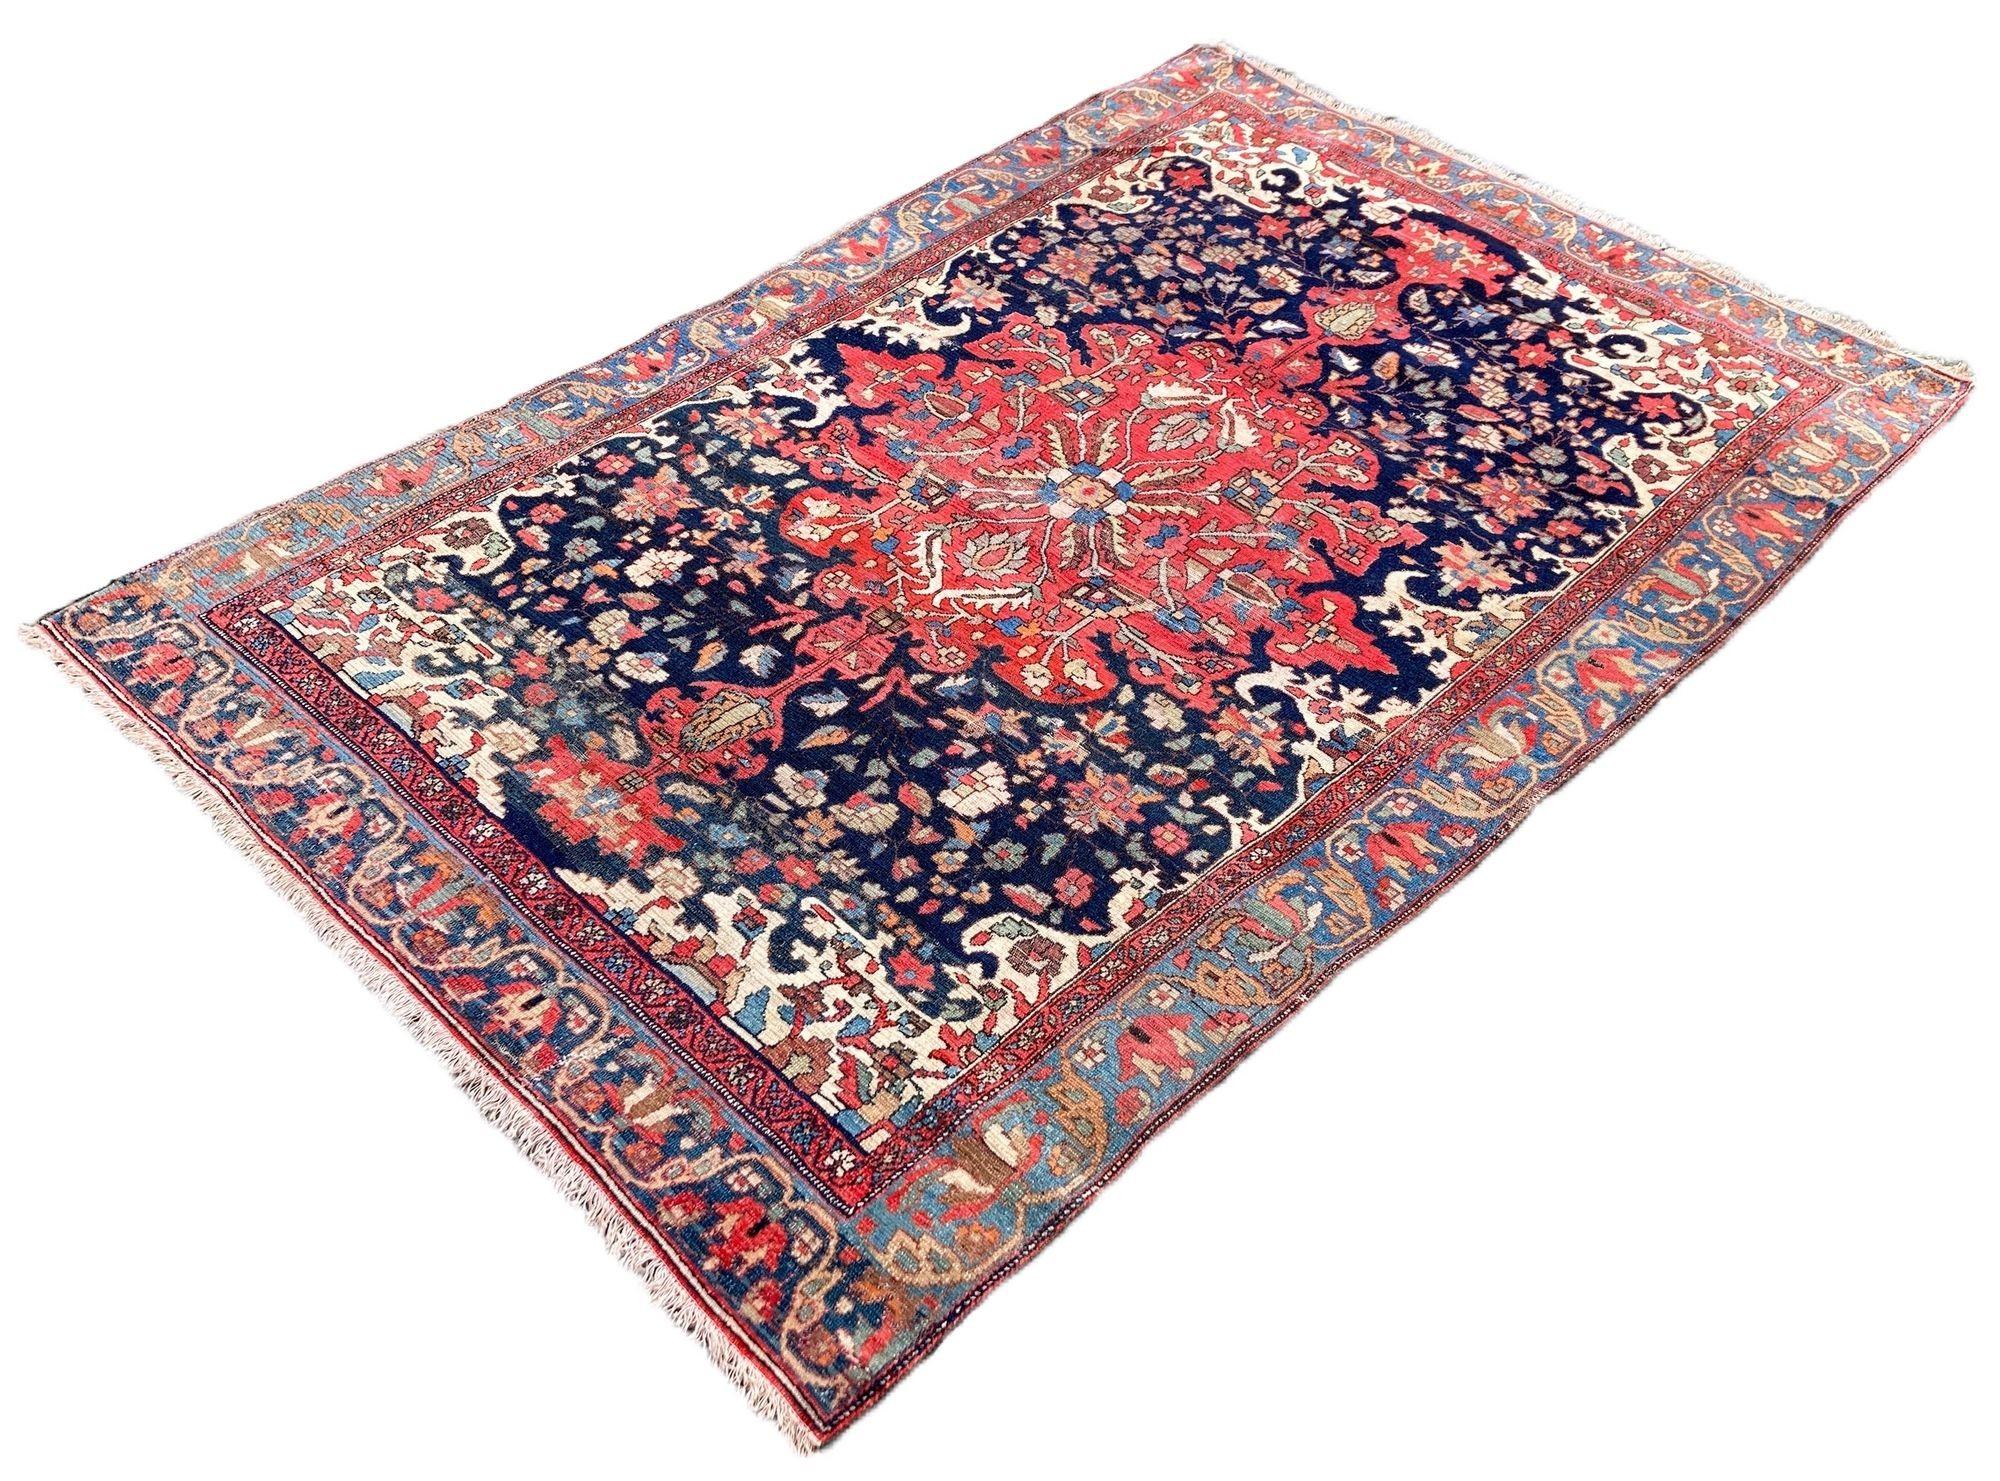 Antique Malayer Rug 1.78m x 1.19m In Fair Condition For Sale In St. Albans, GB